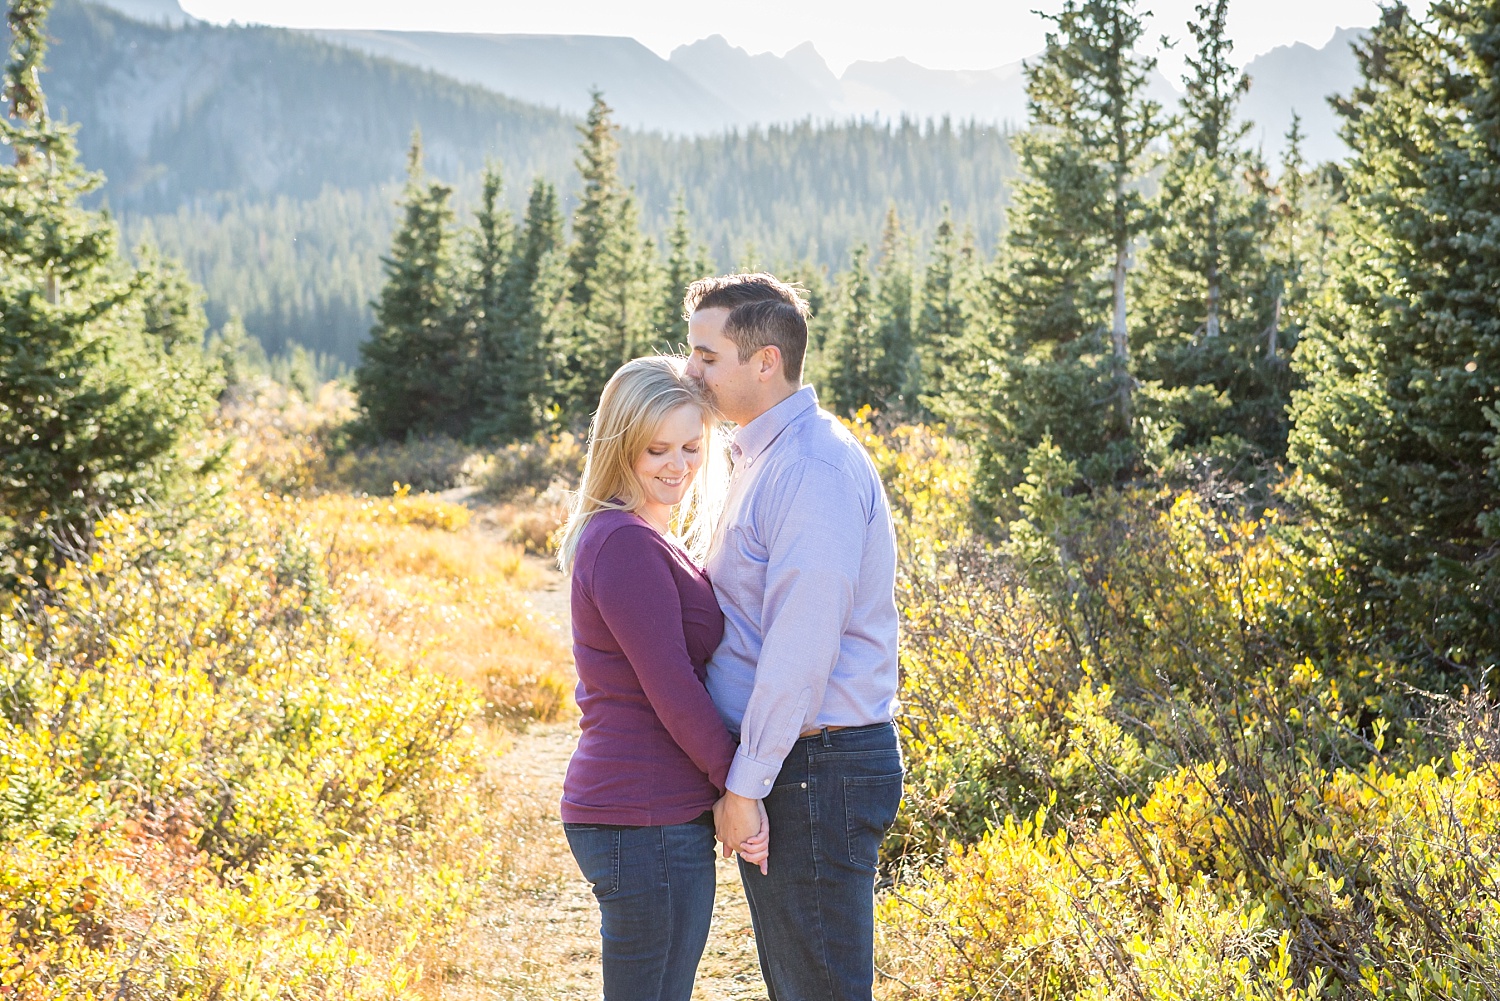 Engagement photography at Brainard Lake with Lauren and Ben